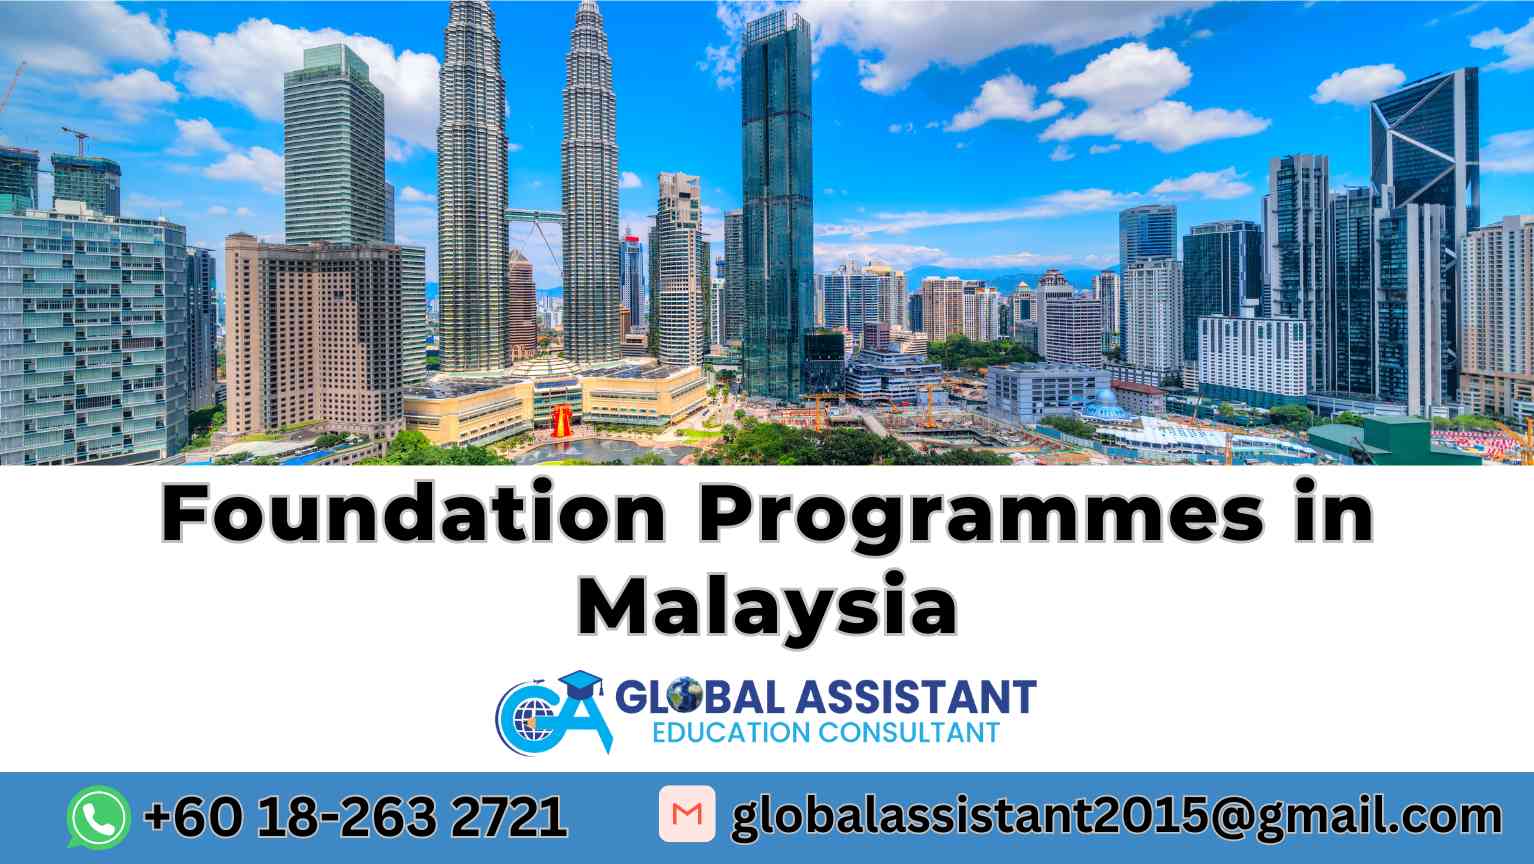 Foundation Programmes in Malaysia